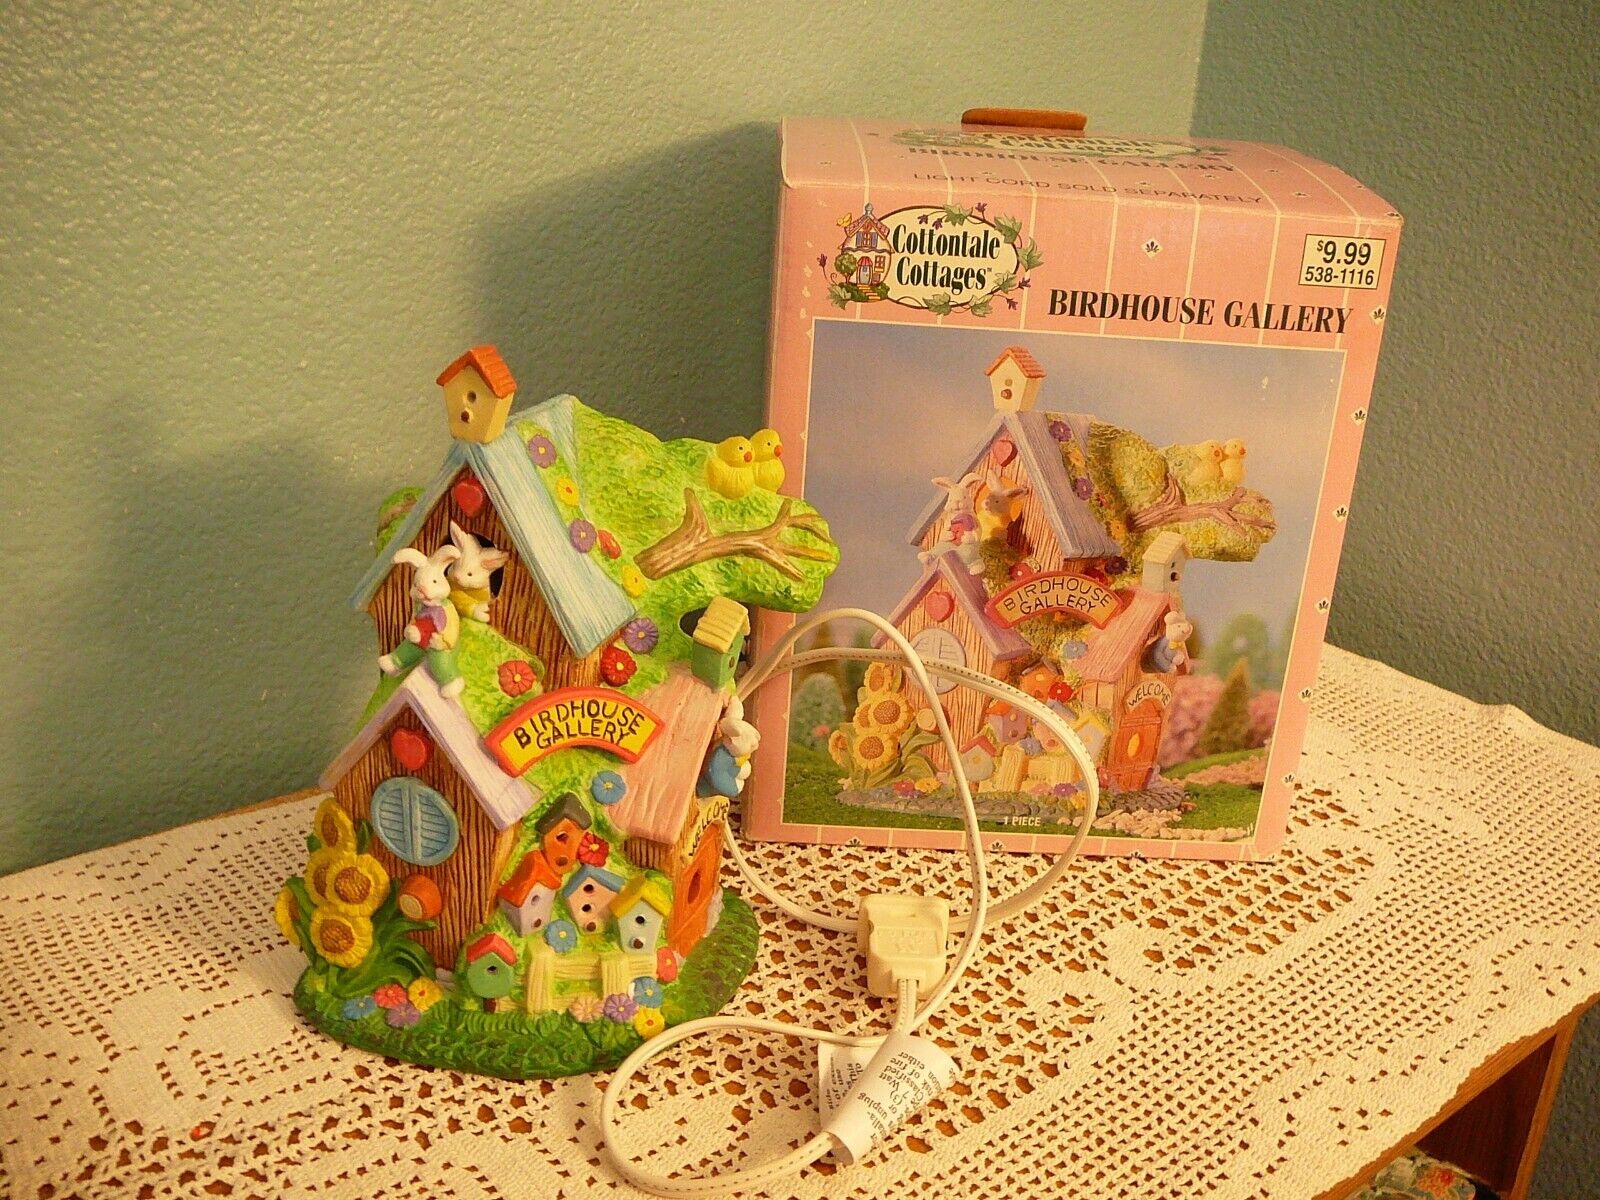 EASTER COTTONTALE COTTAGES LIGHTED BIRDHOUSE GALLERY 2001 WITH BOX EXCELLENT